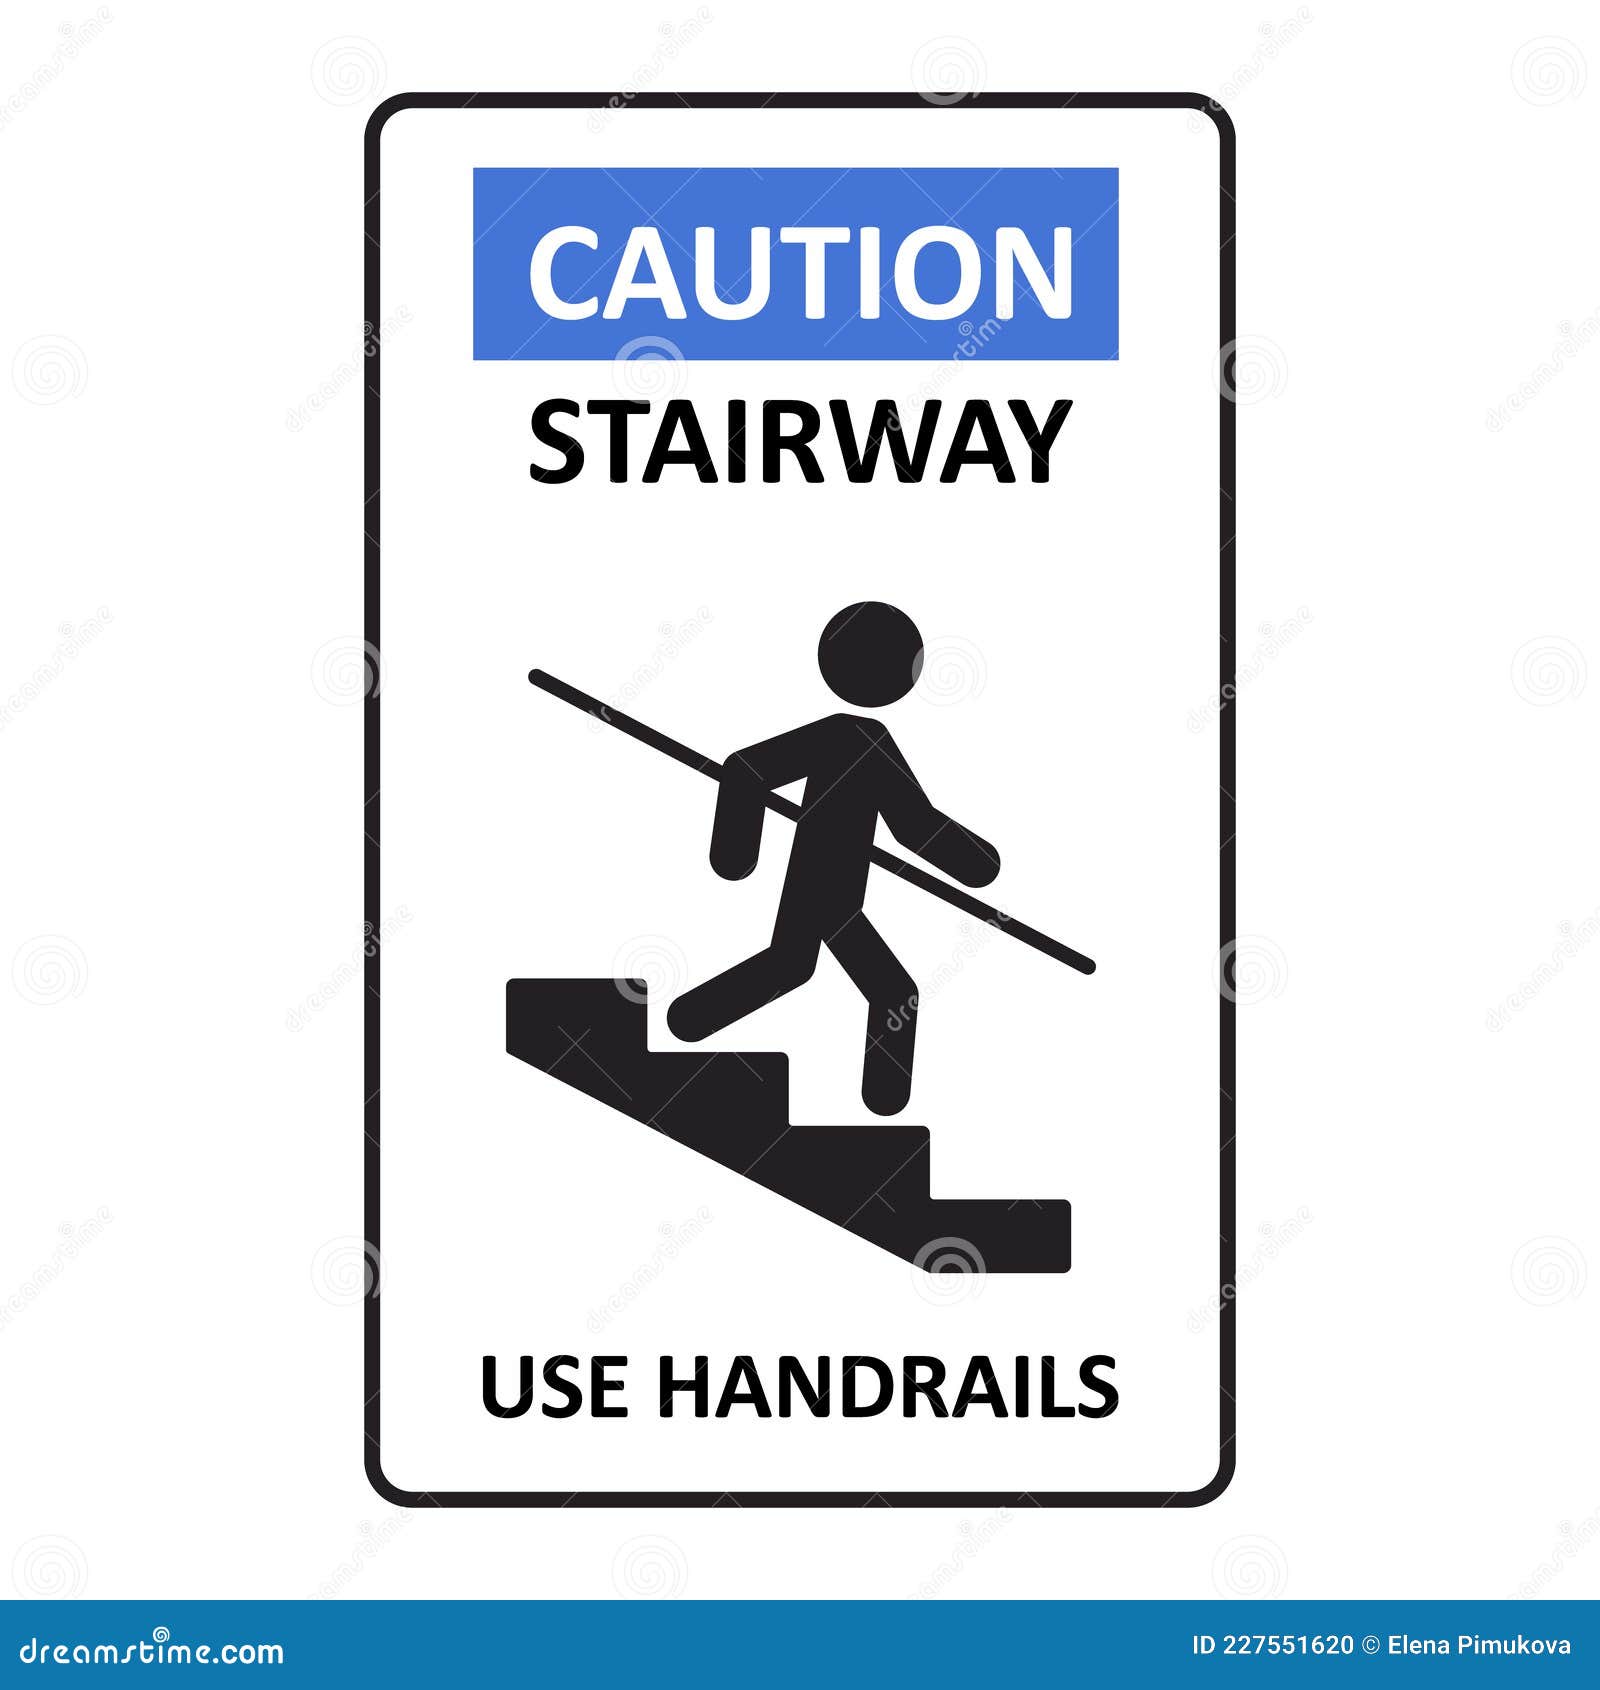 caution-stairway-use-handrails-sign-a-man-goes-down-the-stairs-and